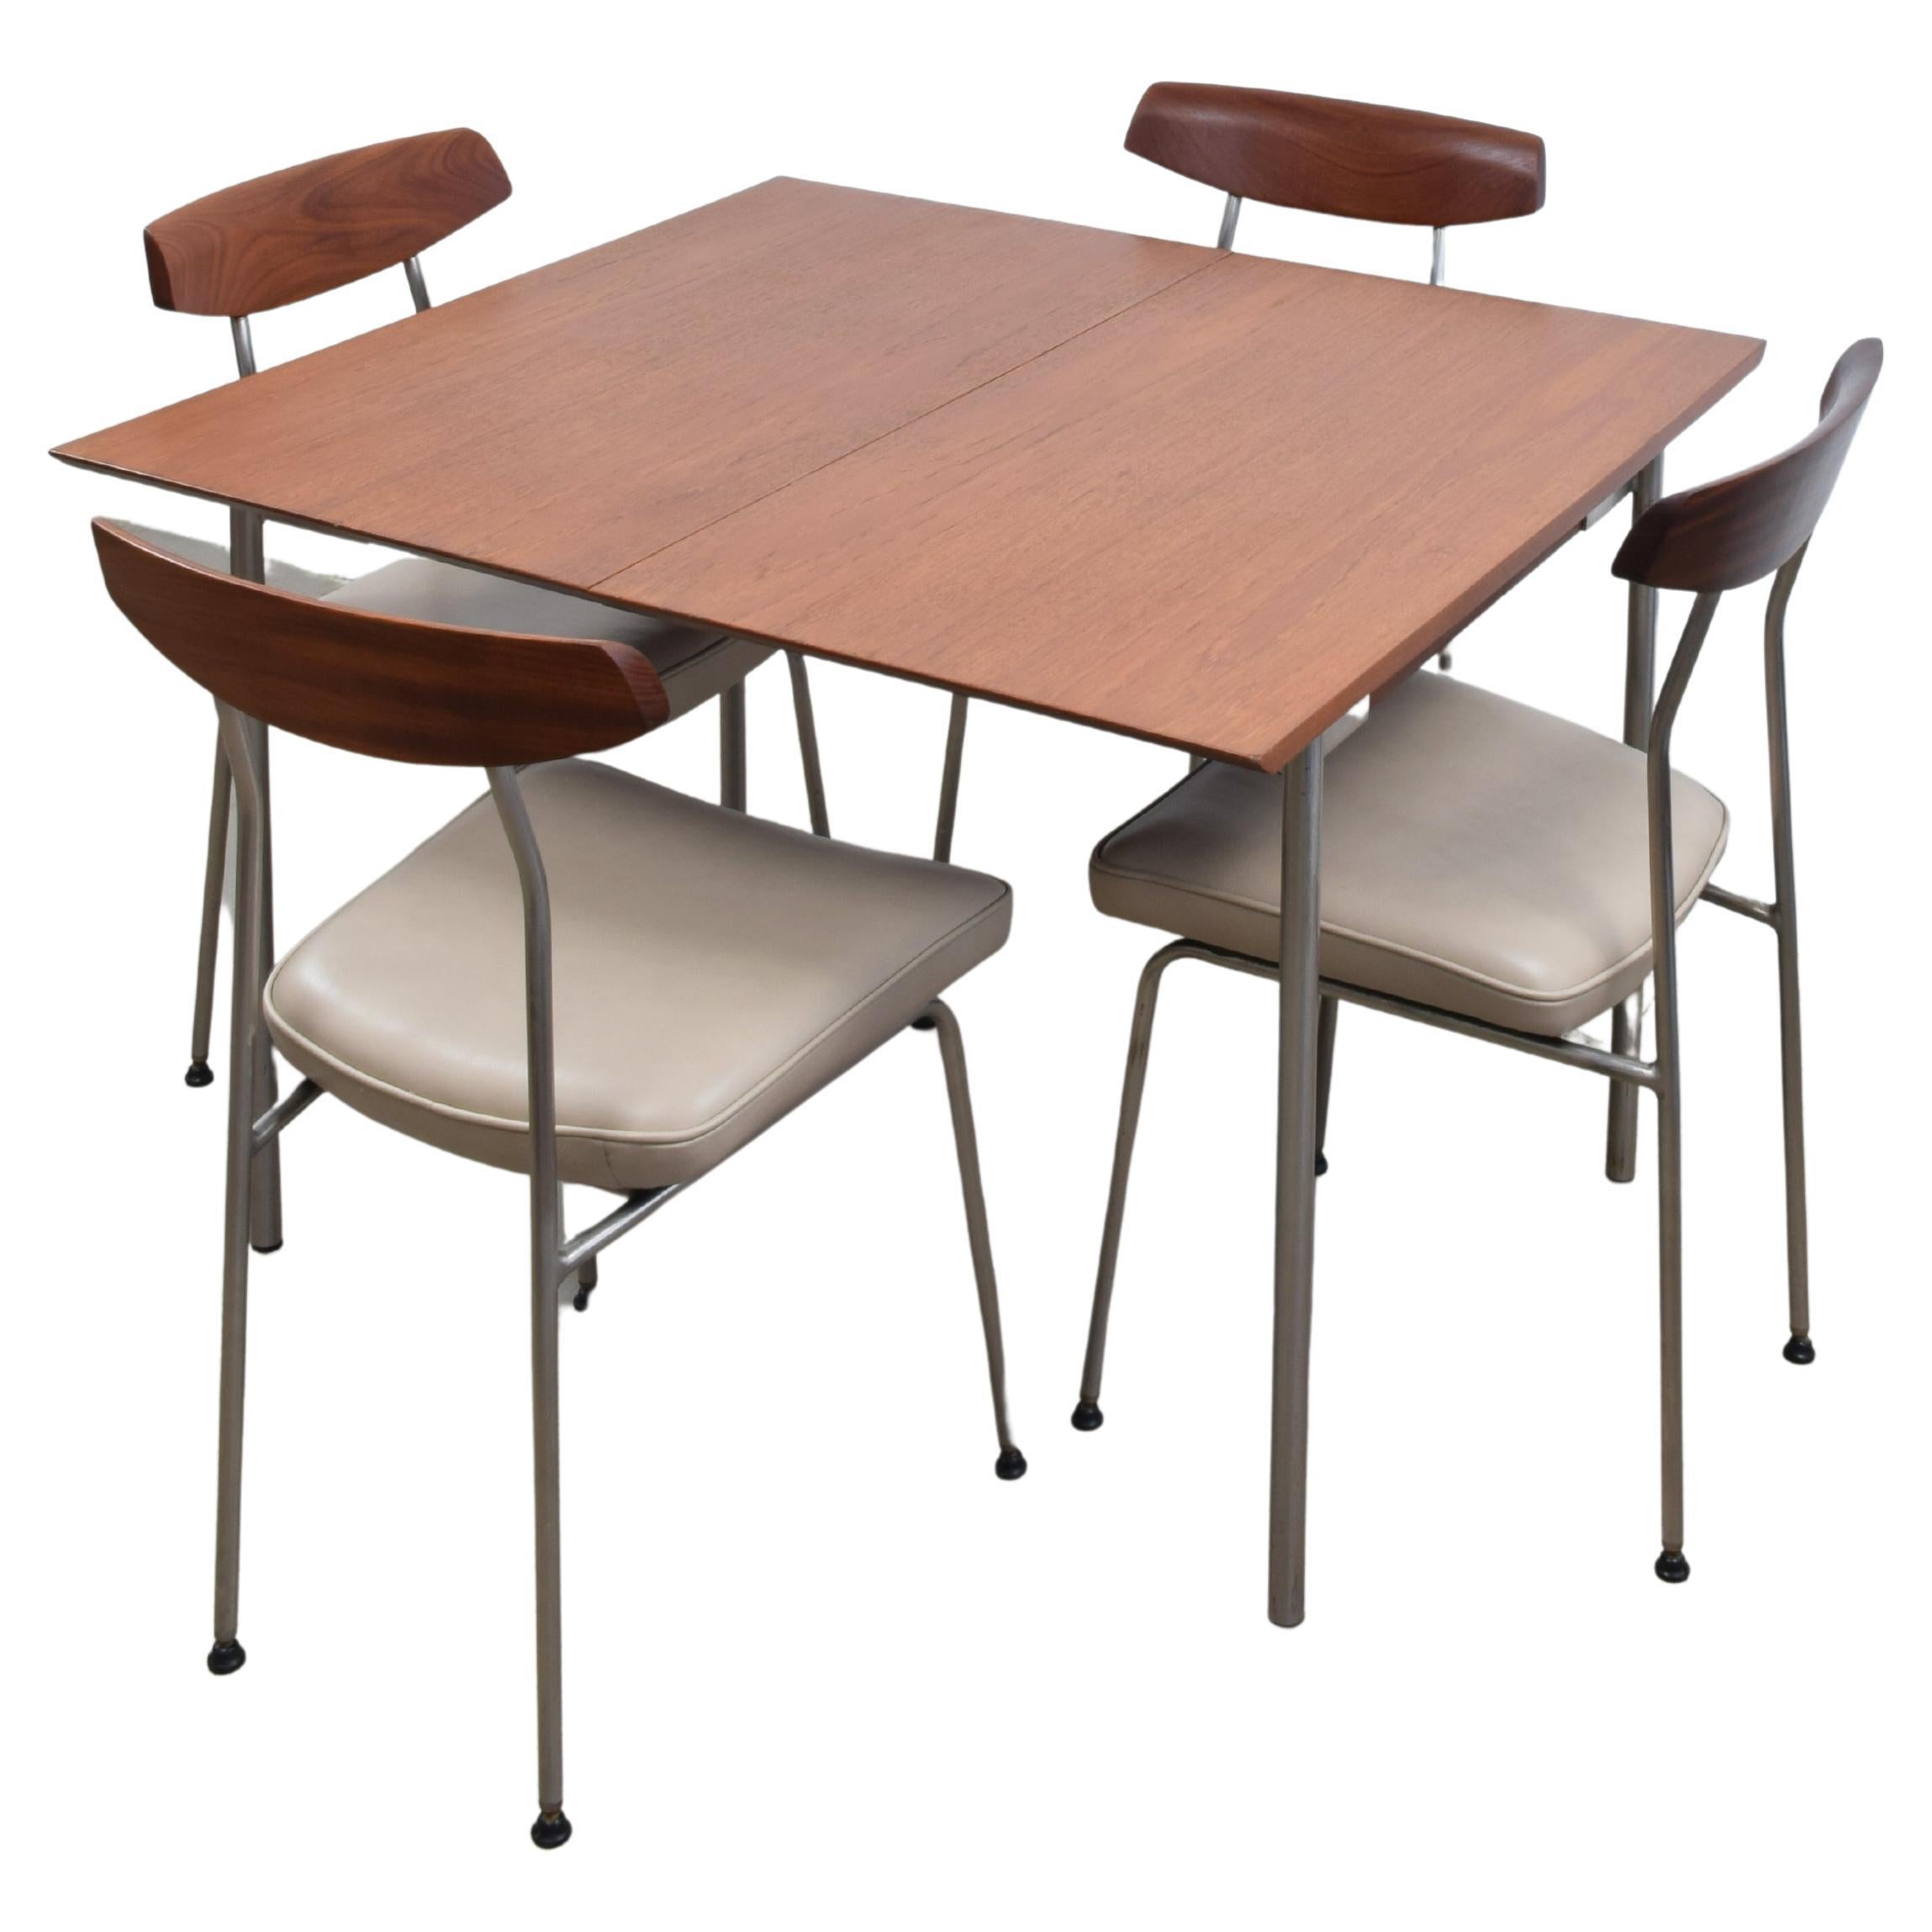 John & Sylvia Reid for Stag, S-Range Dining Suite, 4 Chairs and Extending Table